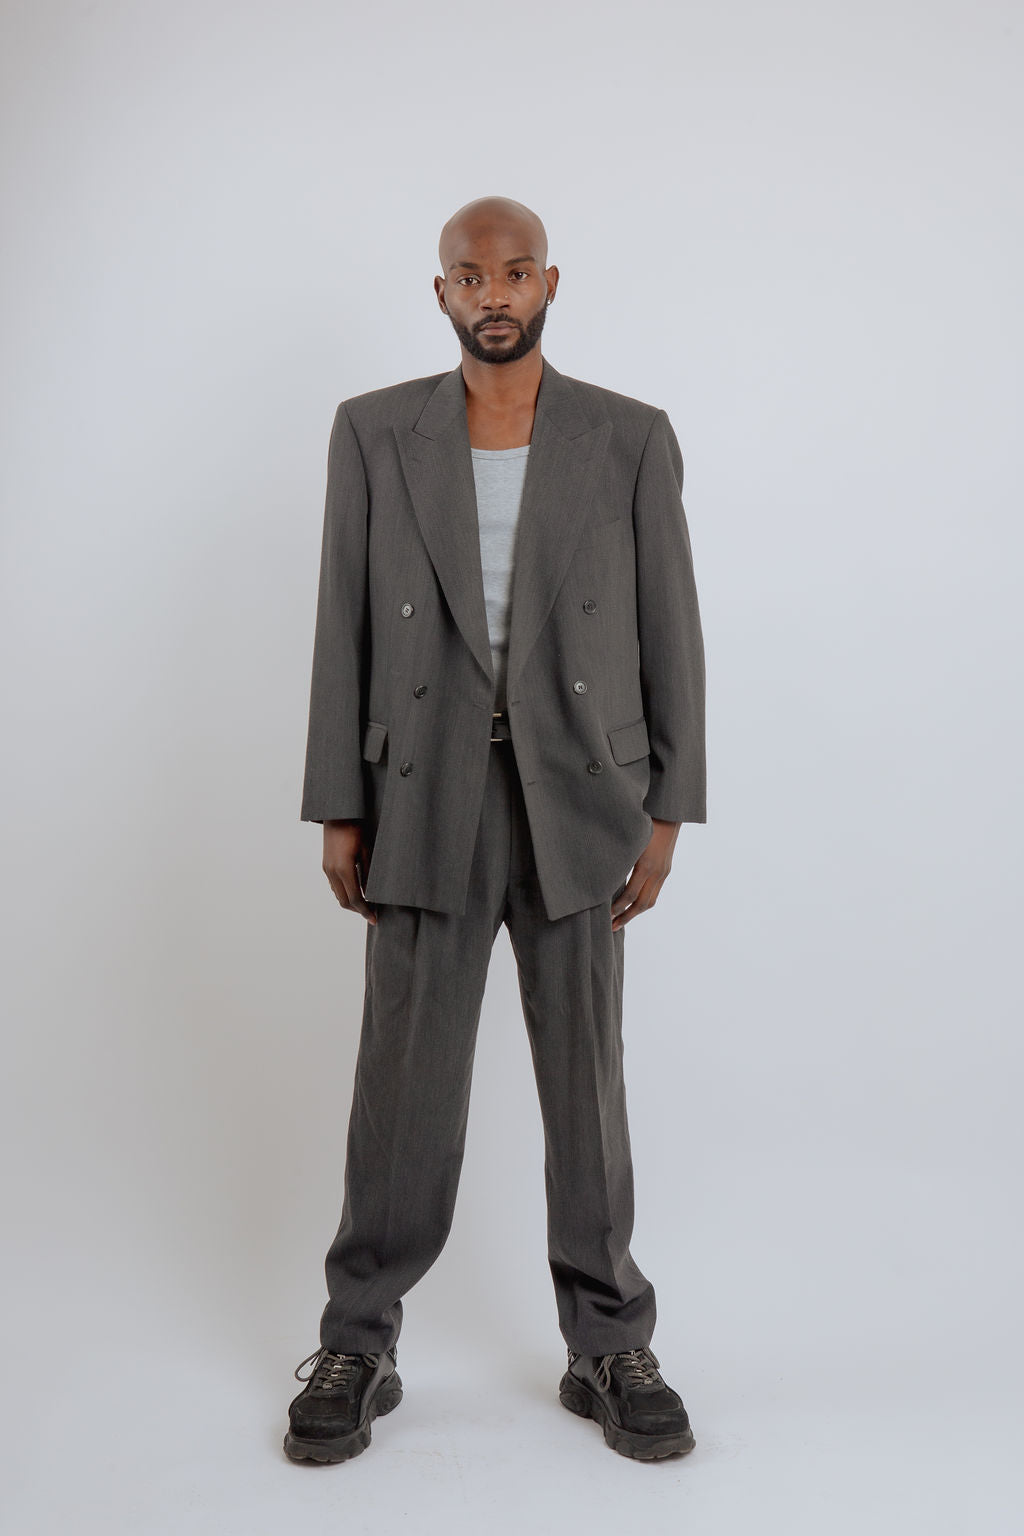 Upcycled Grey Suit